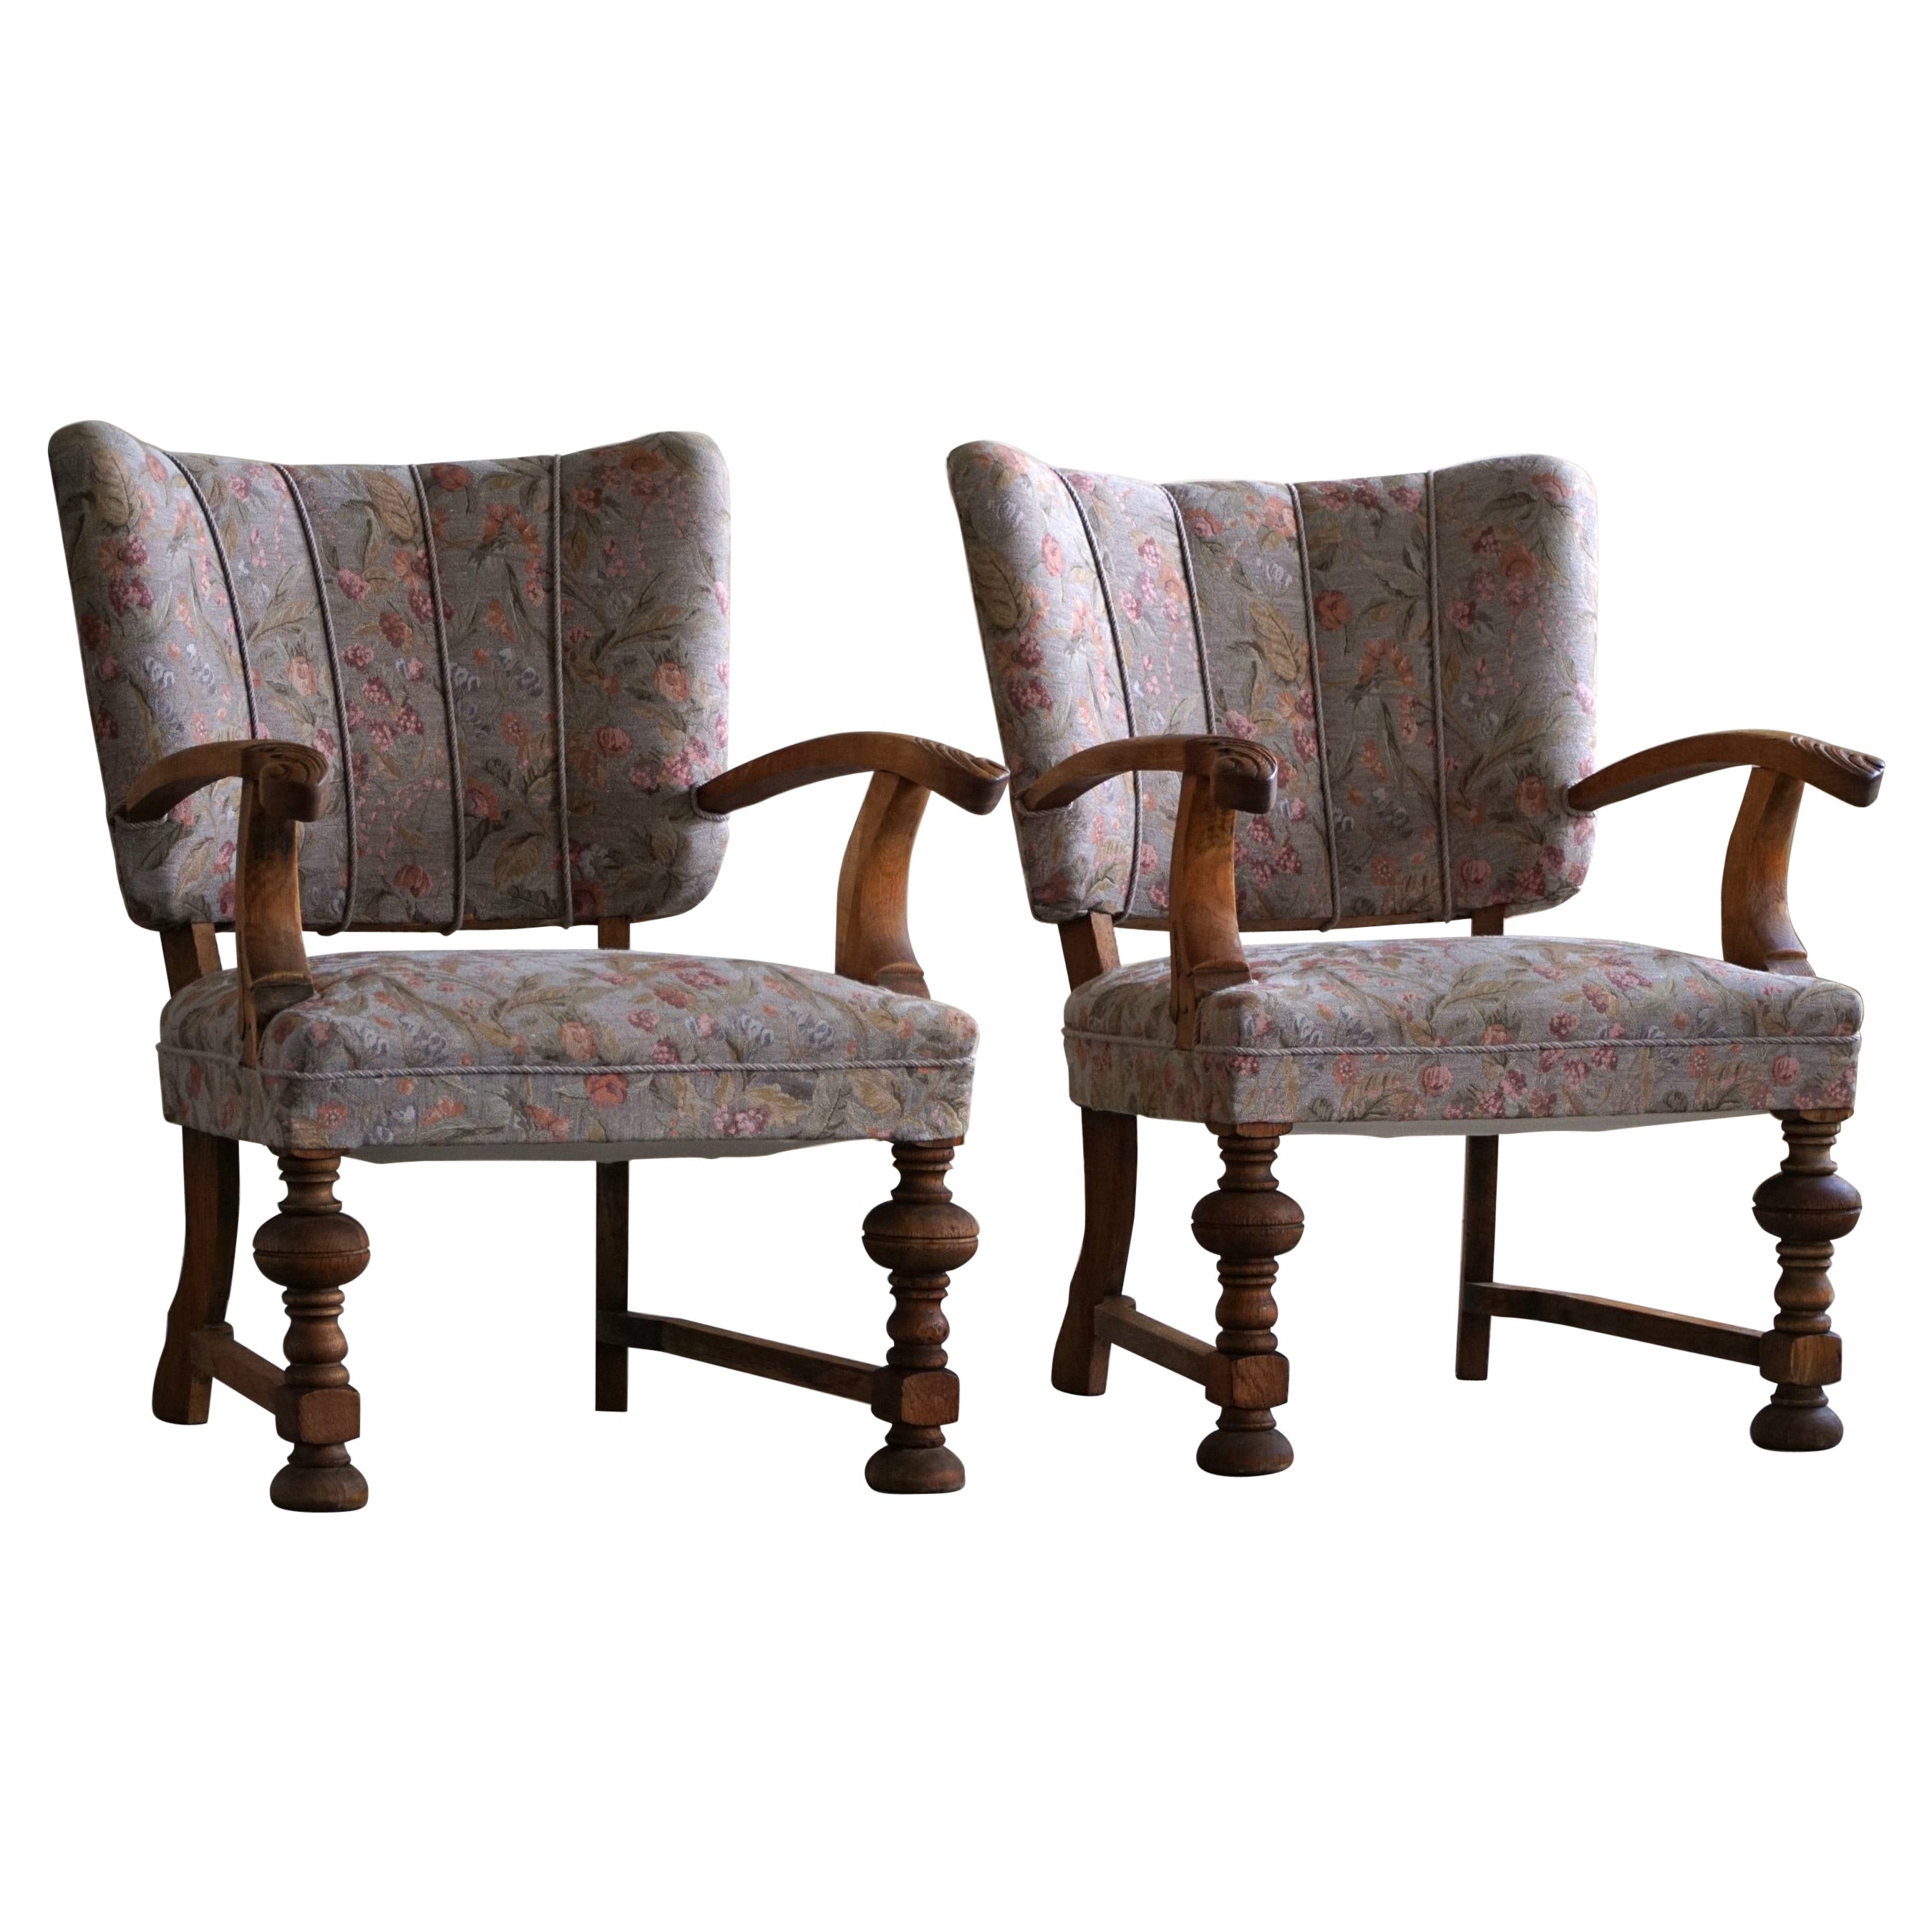 A Pair of Armchairs, By a Danish Cabinetmaker, Art Nouveau, Early 20th Century For Sale